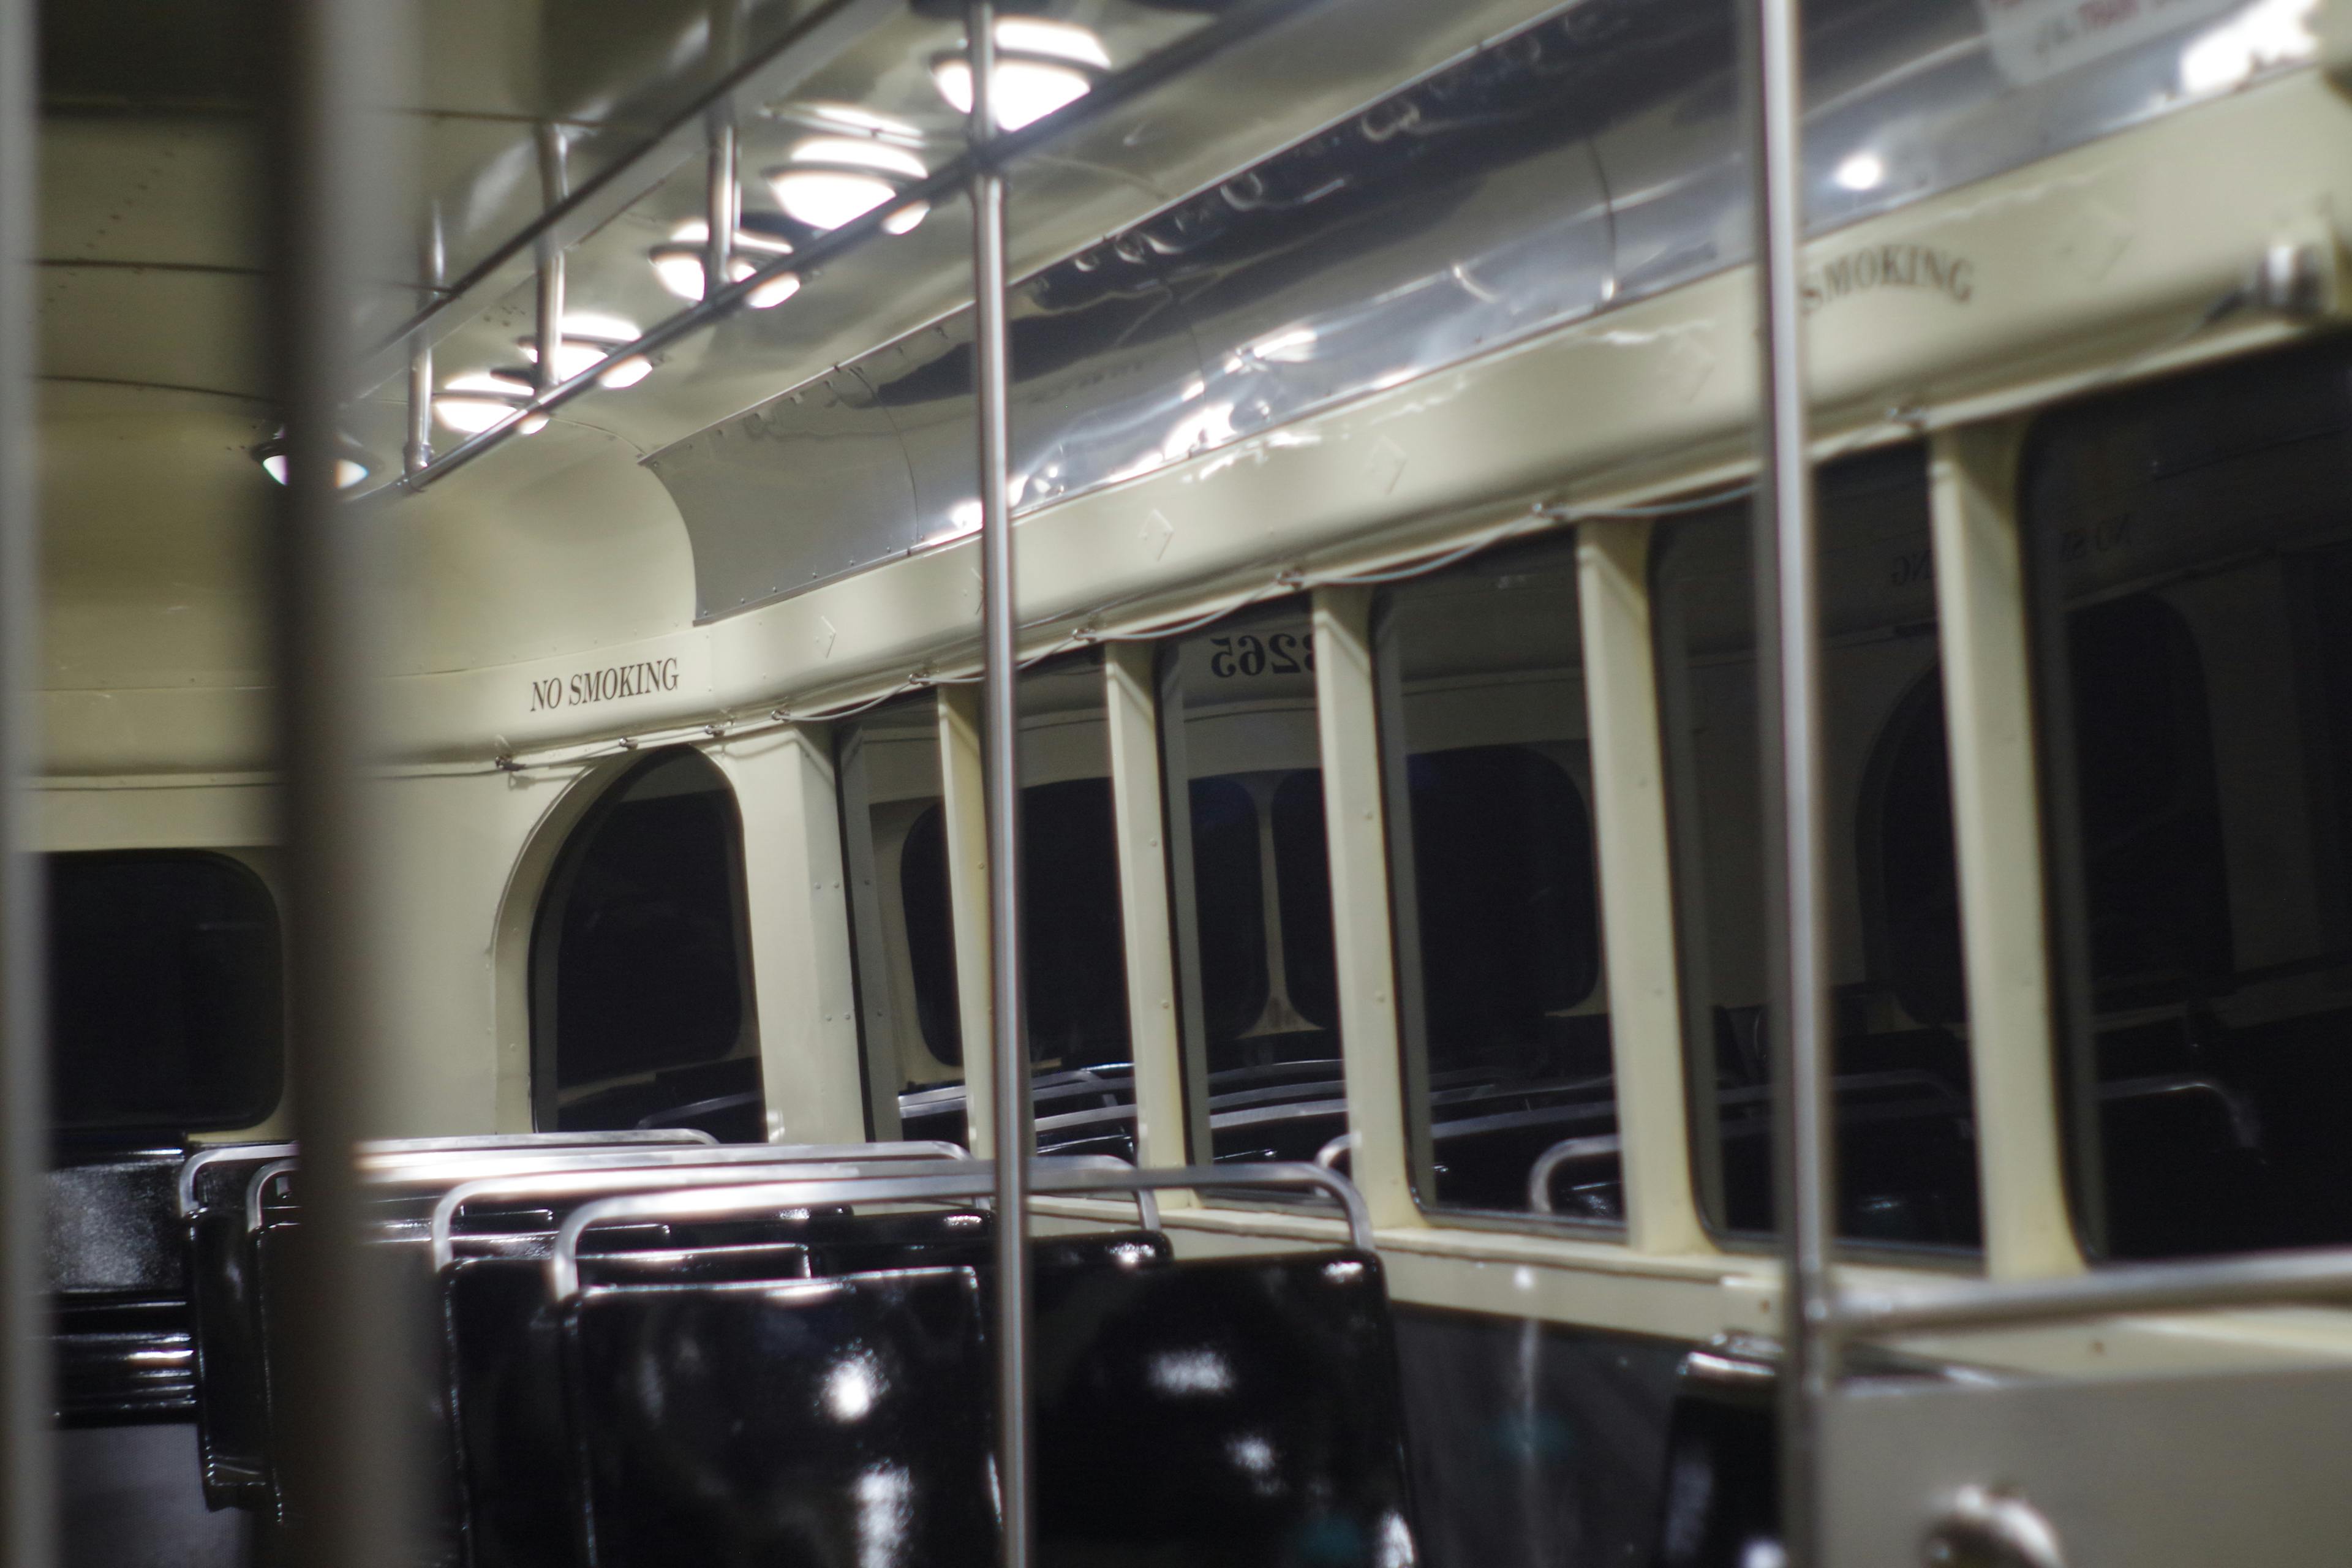 a view of the rear of the same streetcar, with darkness visible in the windows and rows of transverse seating inside the car